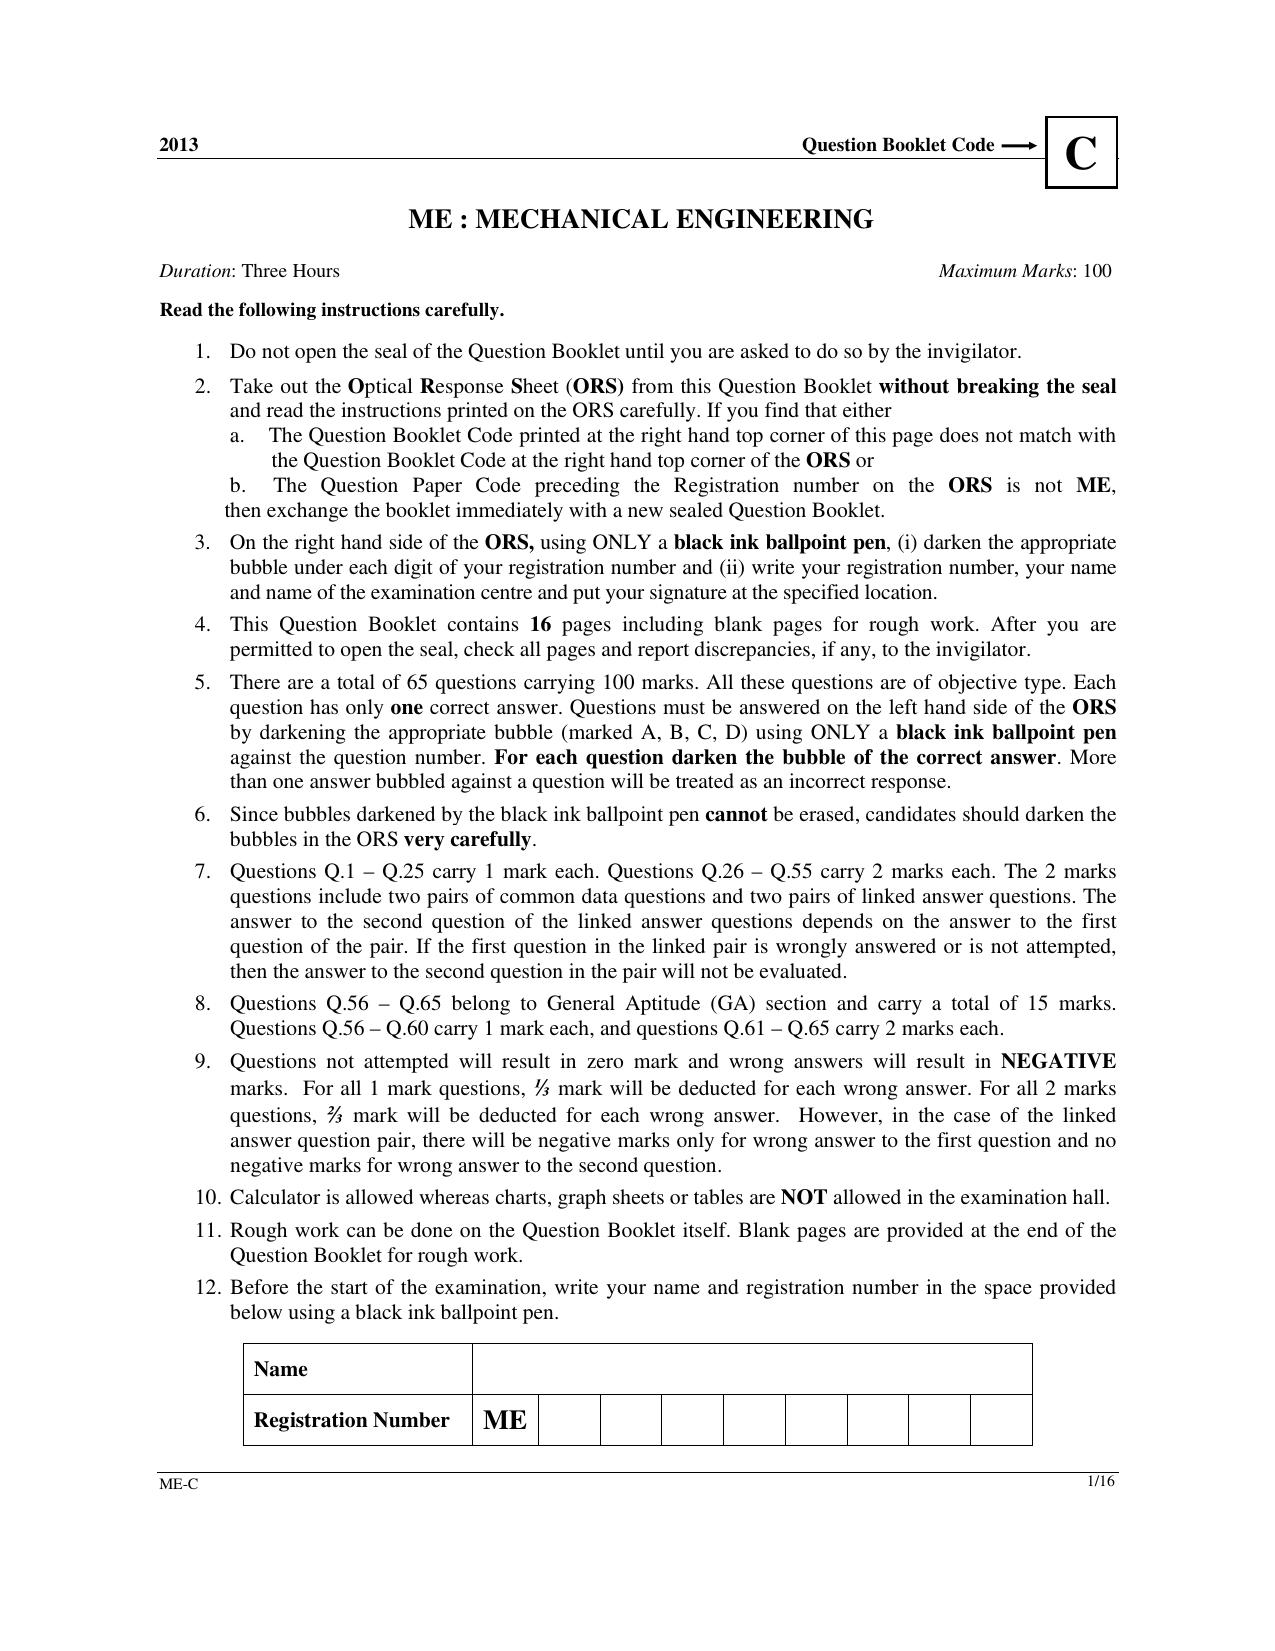 GATE 2013 Mechanical Engineering (ME) Question Paper with Answer Key - Page 30